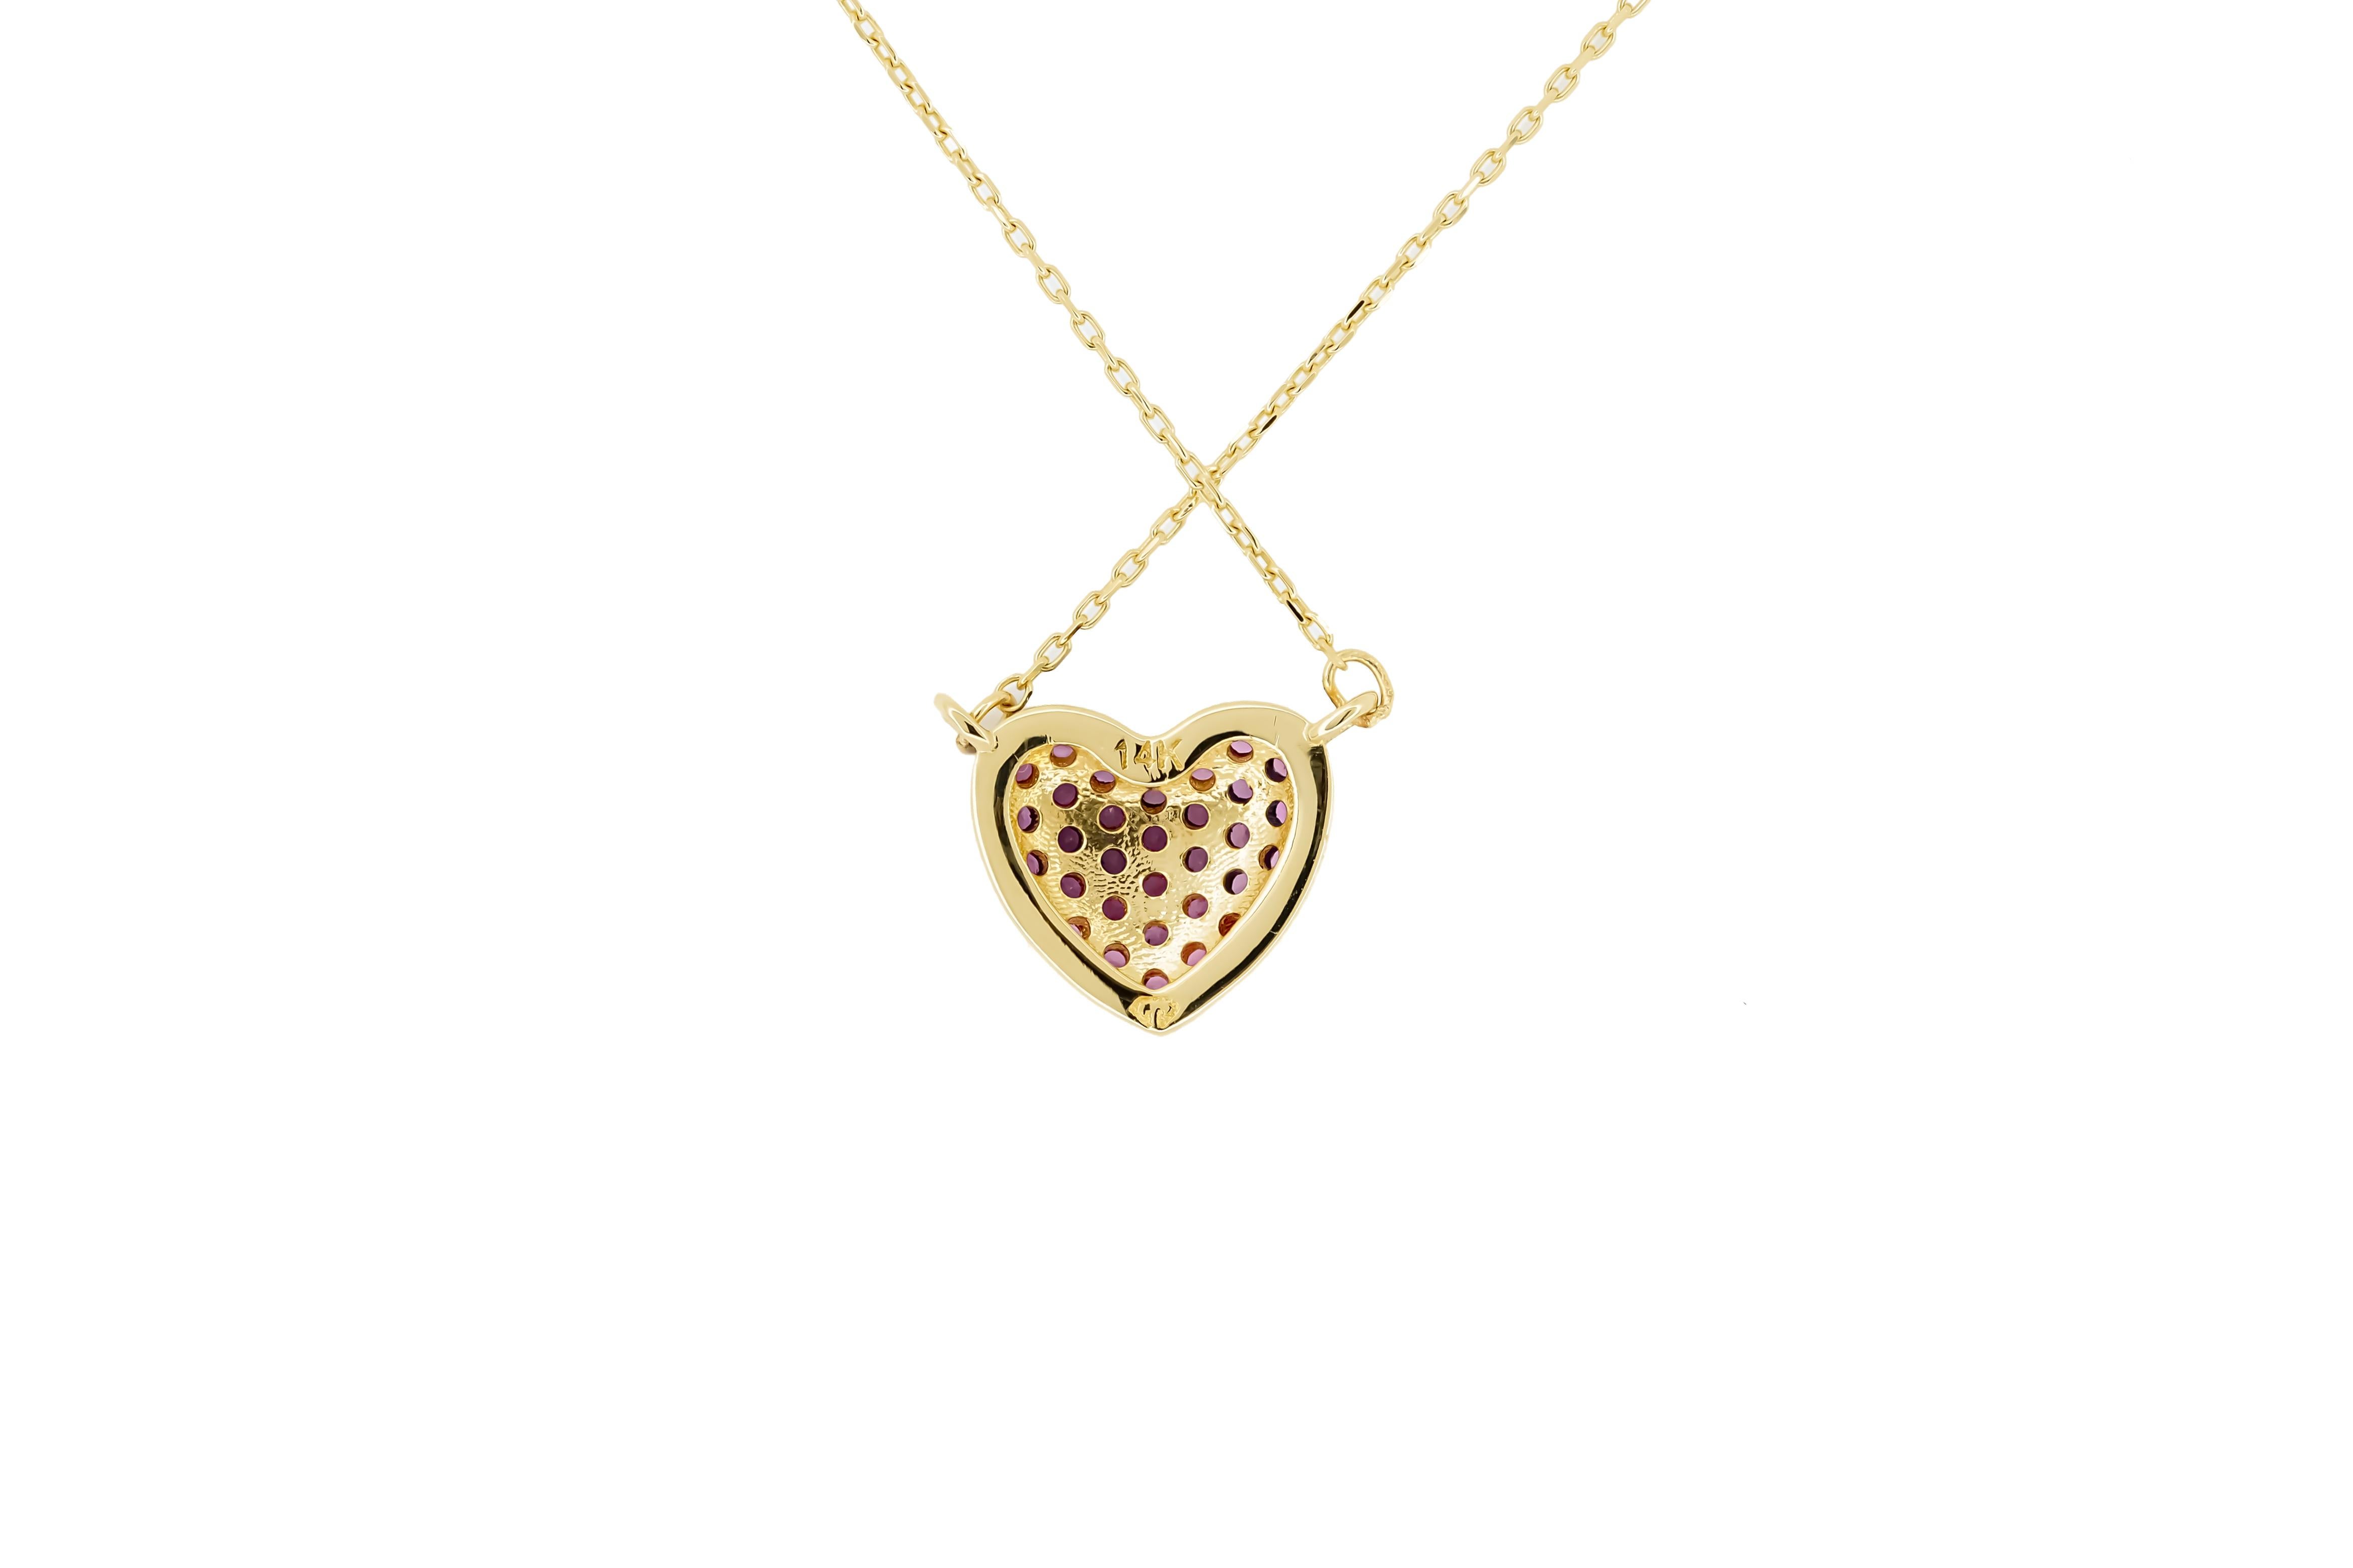 Round Cut Heart shaped 14k gold pendant necklace.  For Sale